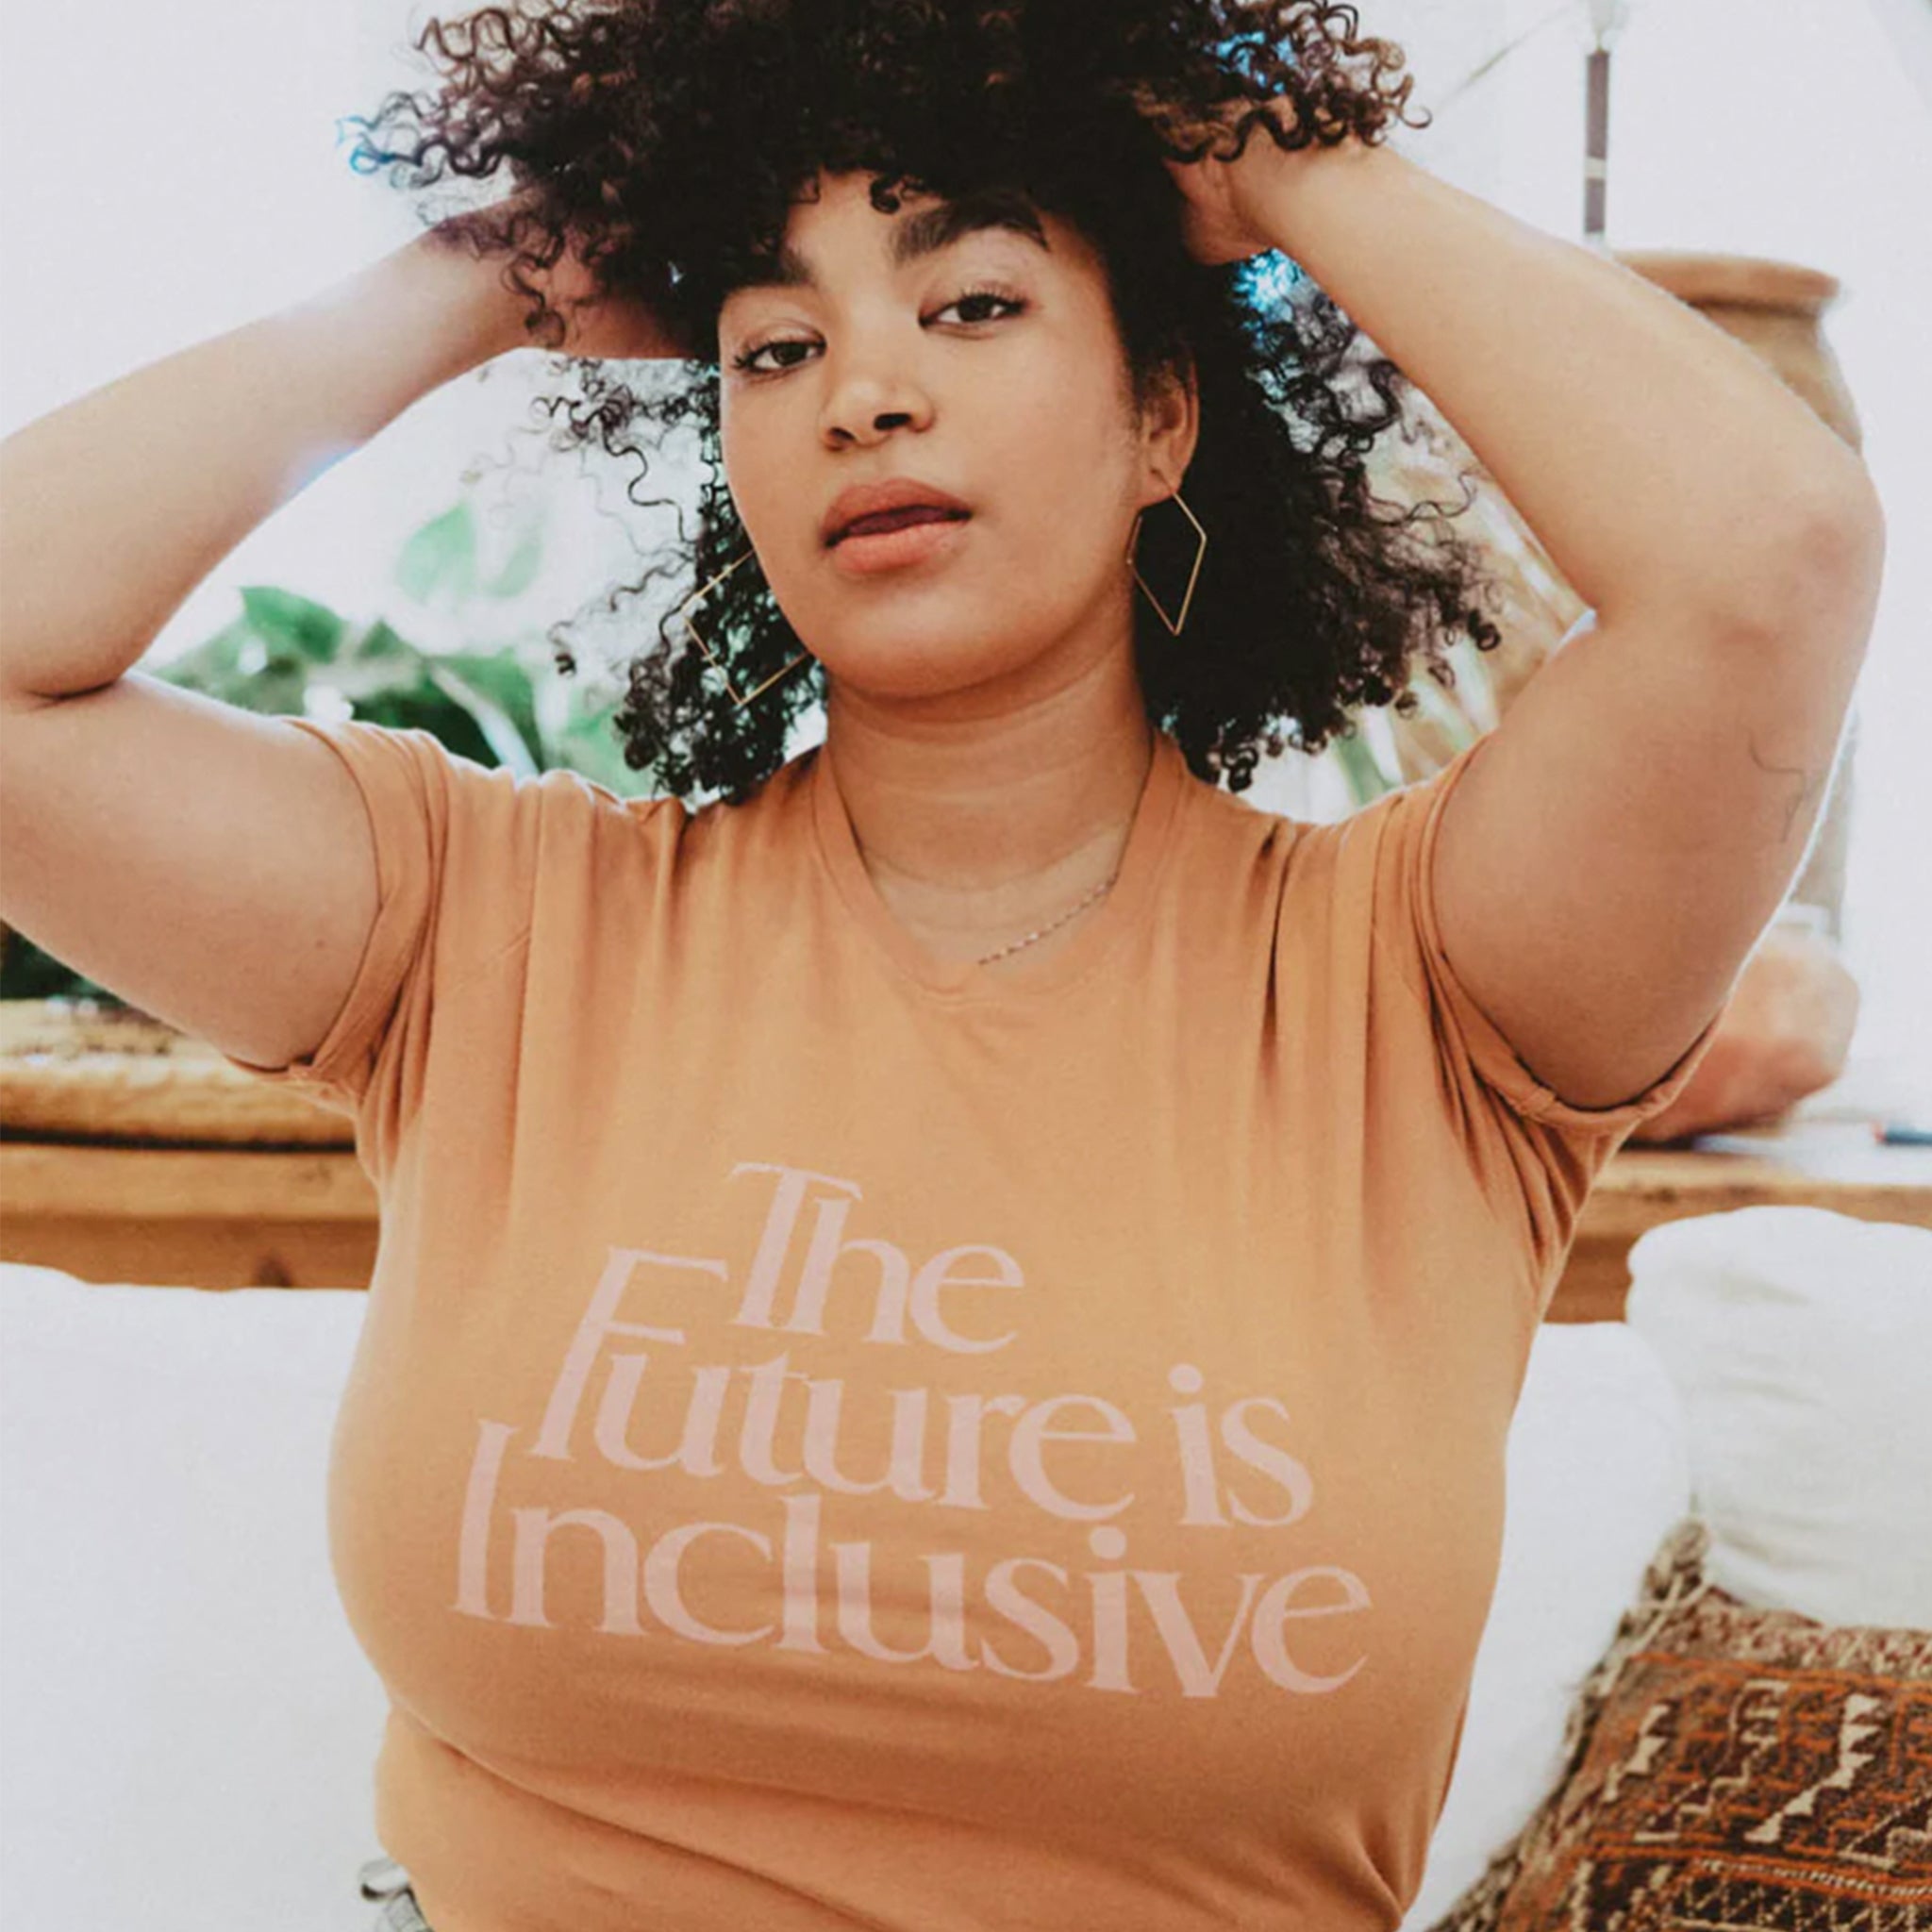 A peach t-shirt with text on the front that reads, "The Future is Inclusive.".